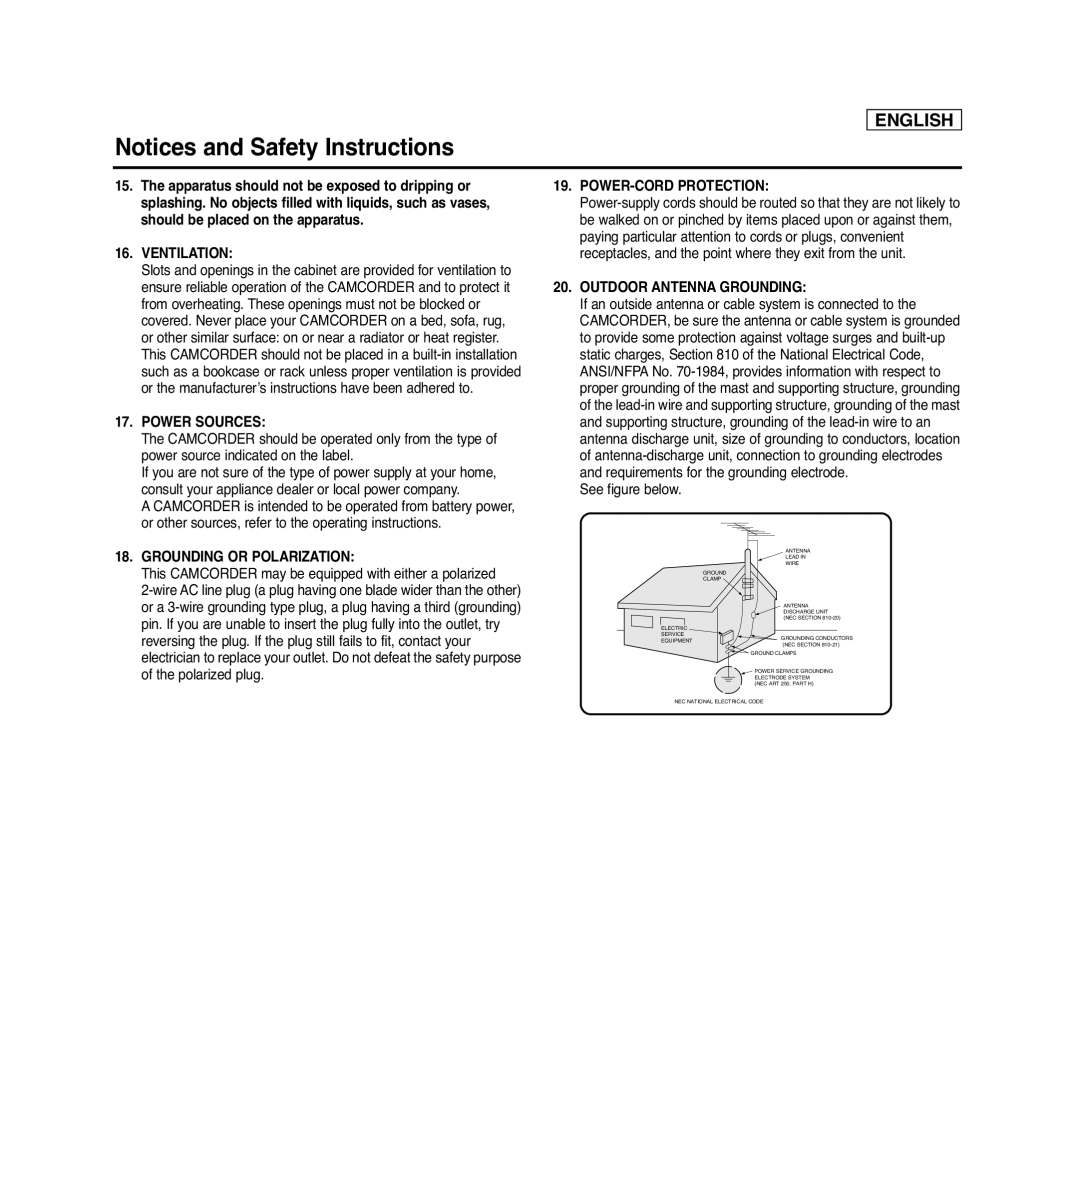 Samsung SC-D362, SC-D263 Notices and Safety Instructions, English, Ventilation, Power Sources, Grounding Or Polarization 